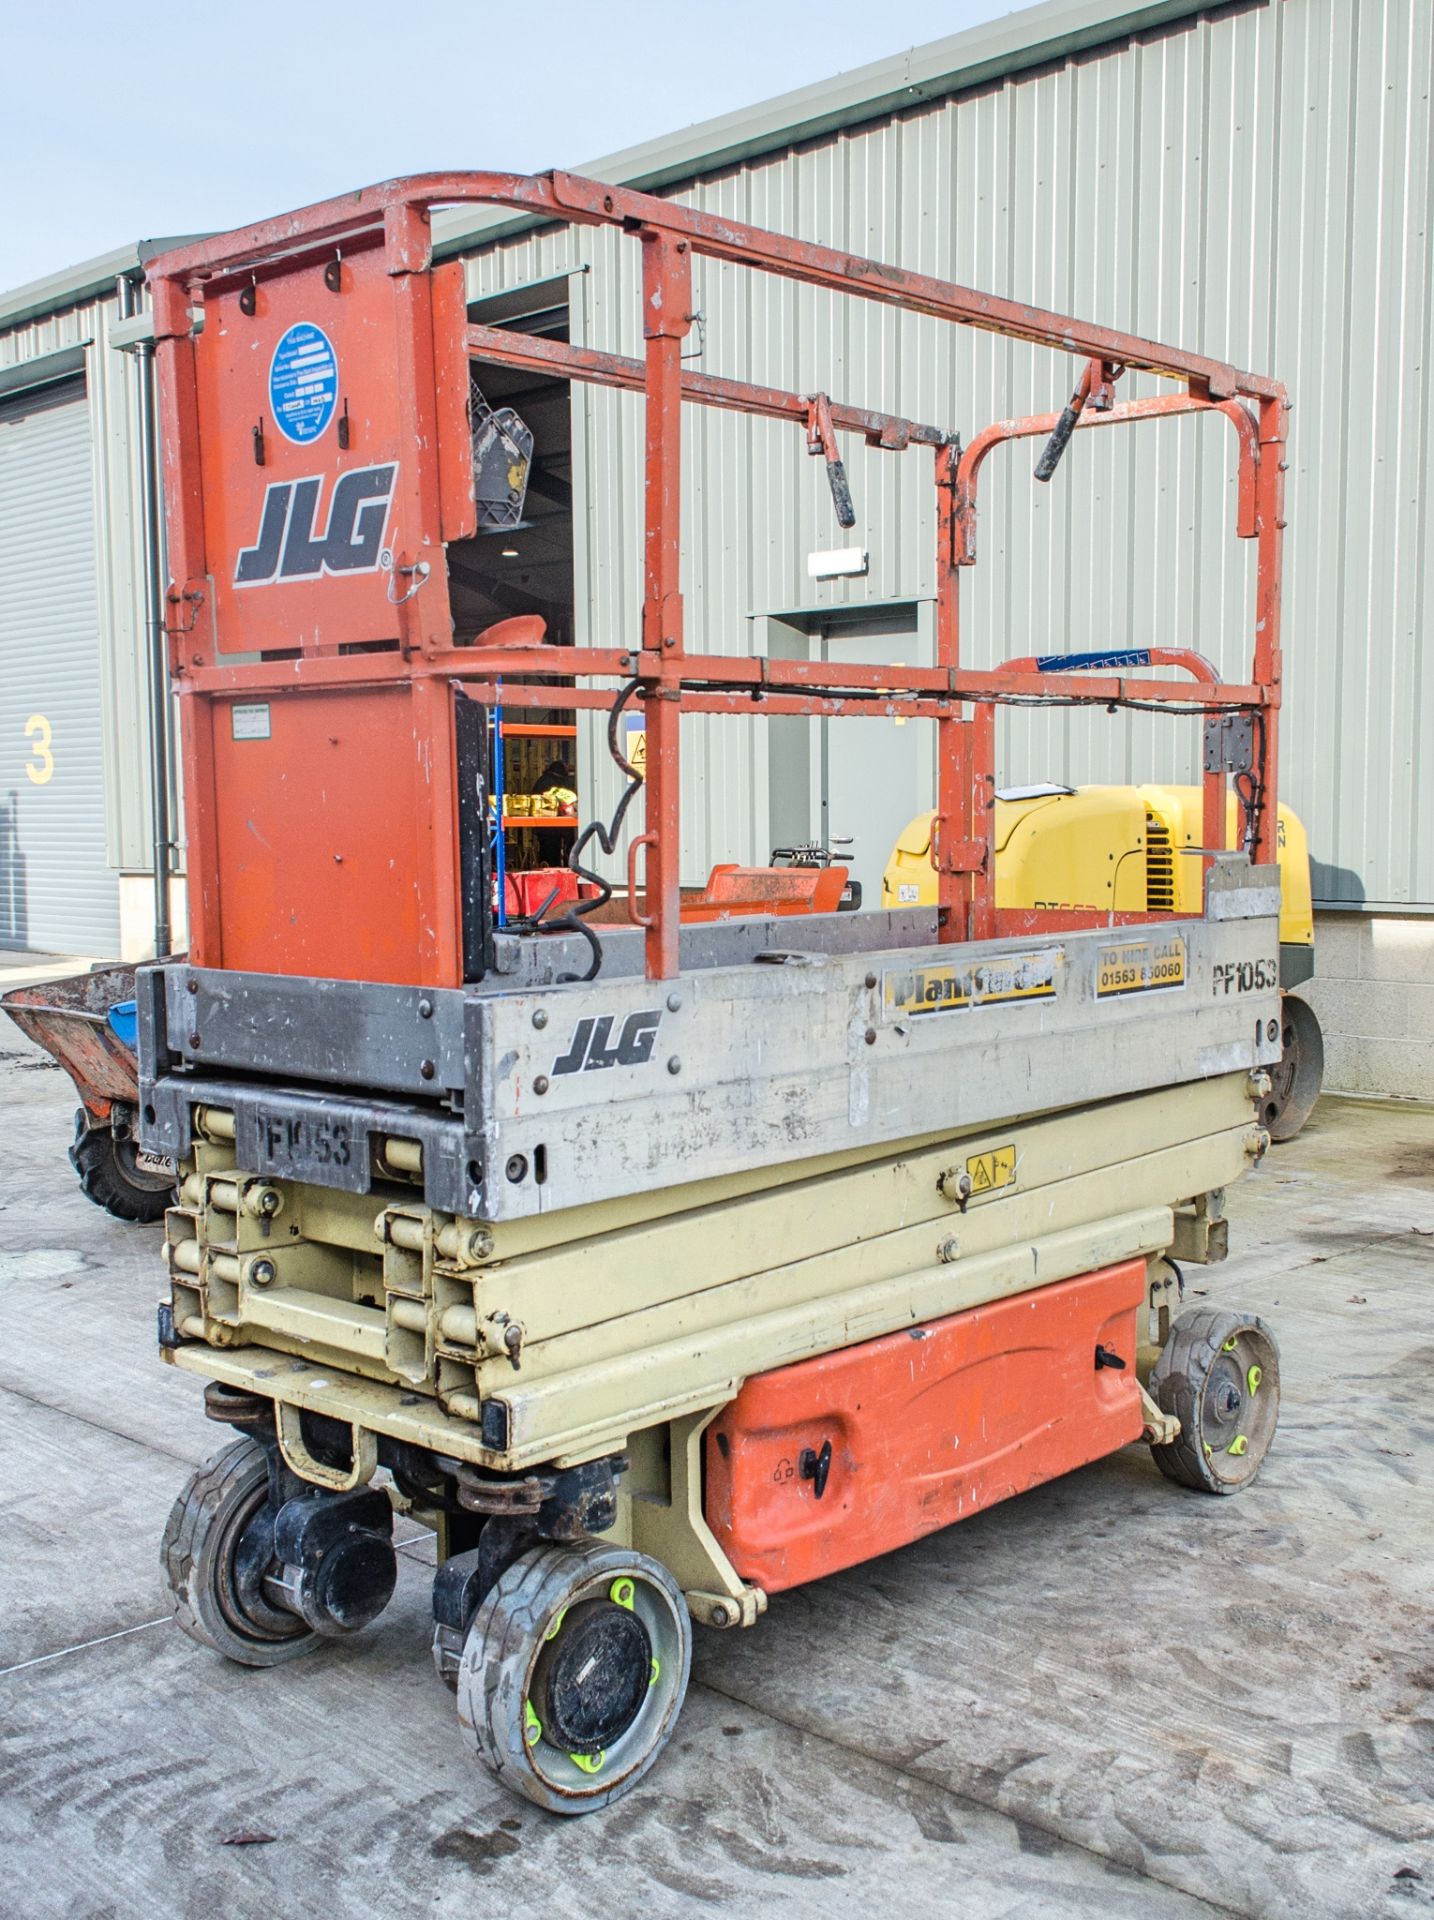 JLG 1930ES battery electric scissor lift Year: 2010 S/N: 1200023651 Recorded hours: 49 PF1053